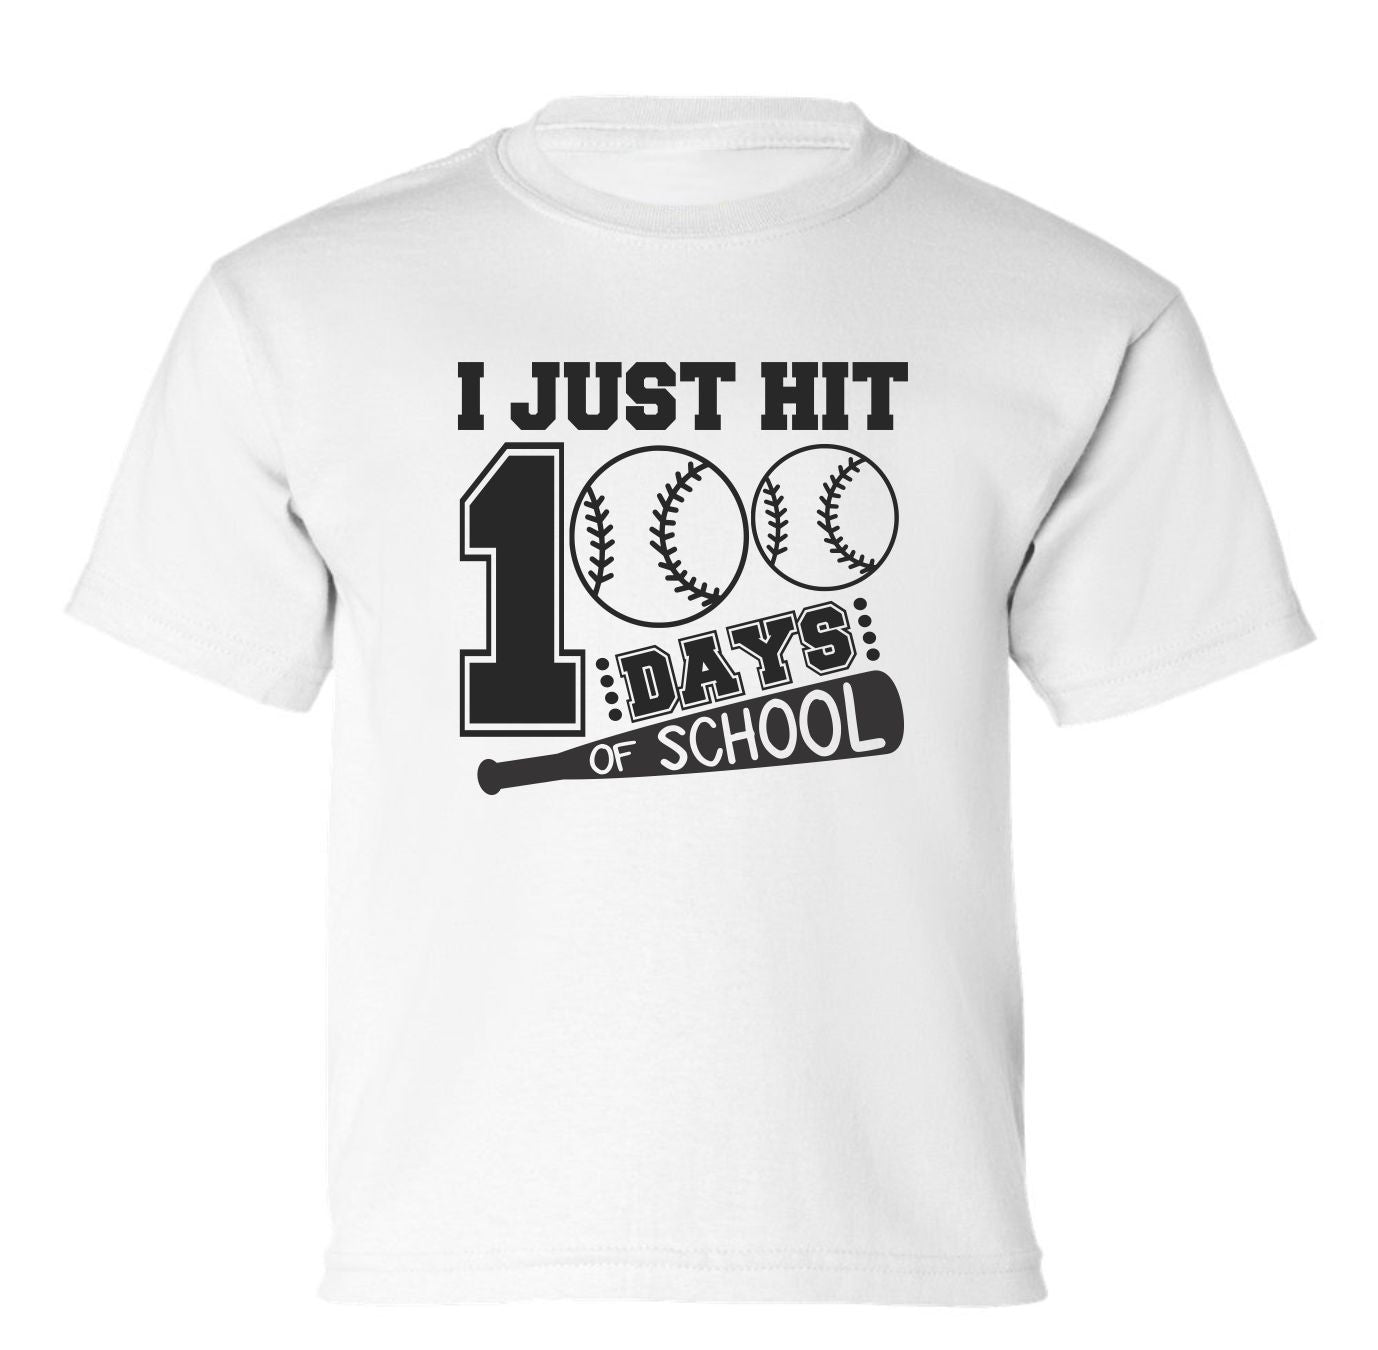 "I Just Hit 100 Days Of School" Toddler/Youth T-Shirt